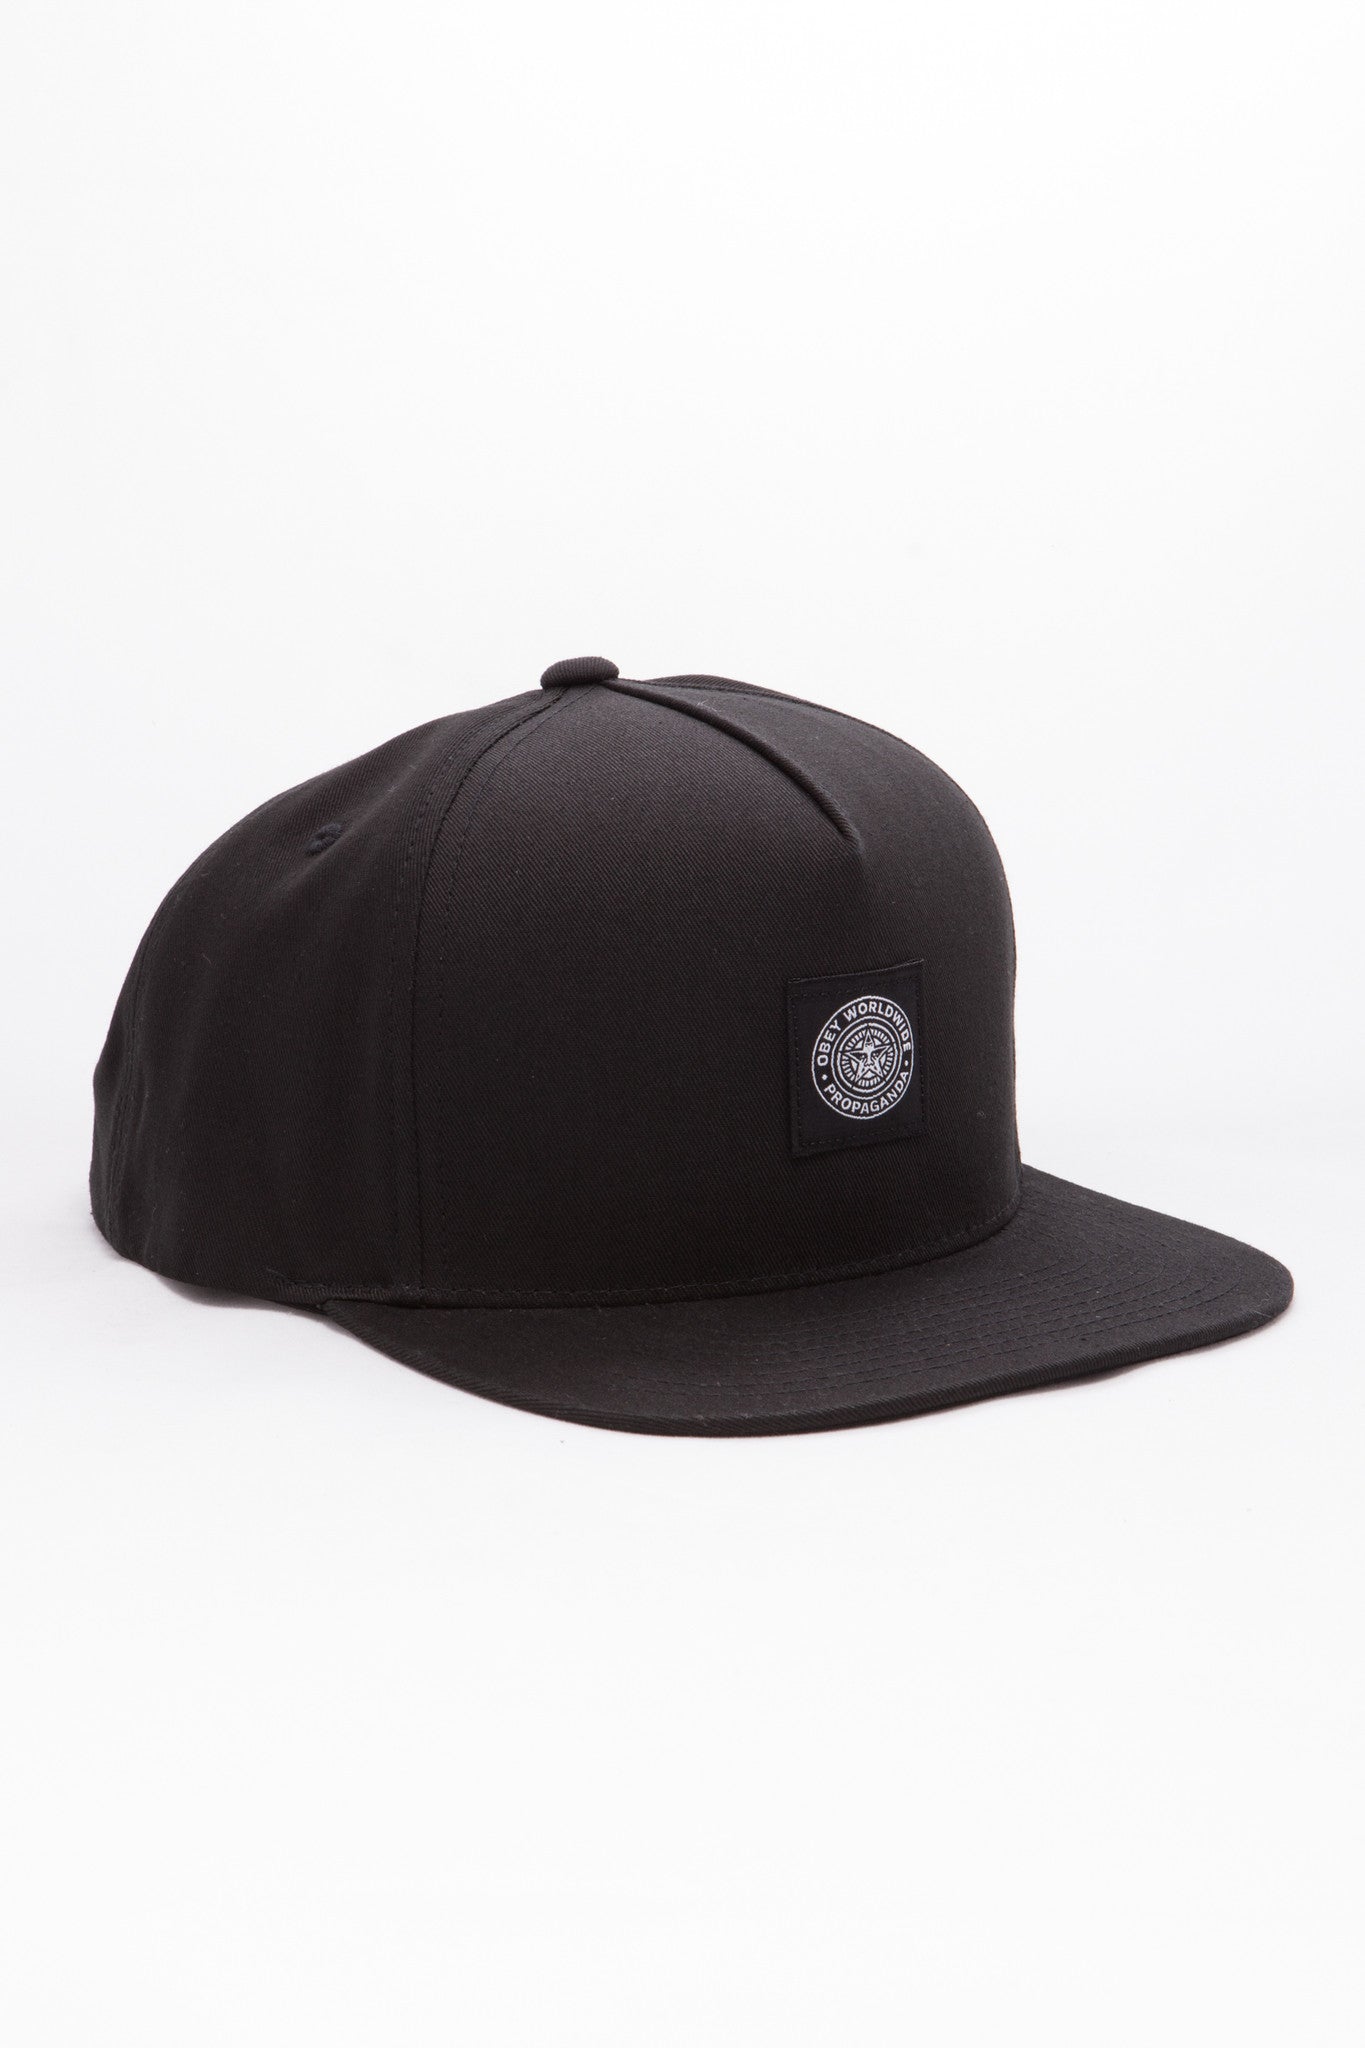 OBEY - Downtown Men's Snapback, Black - The Giant Peach